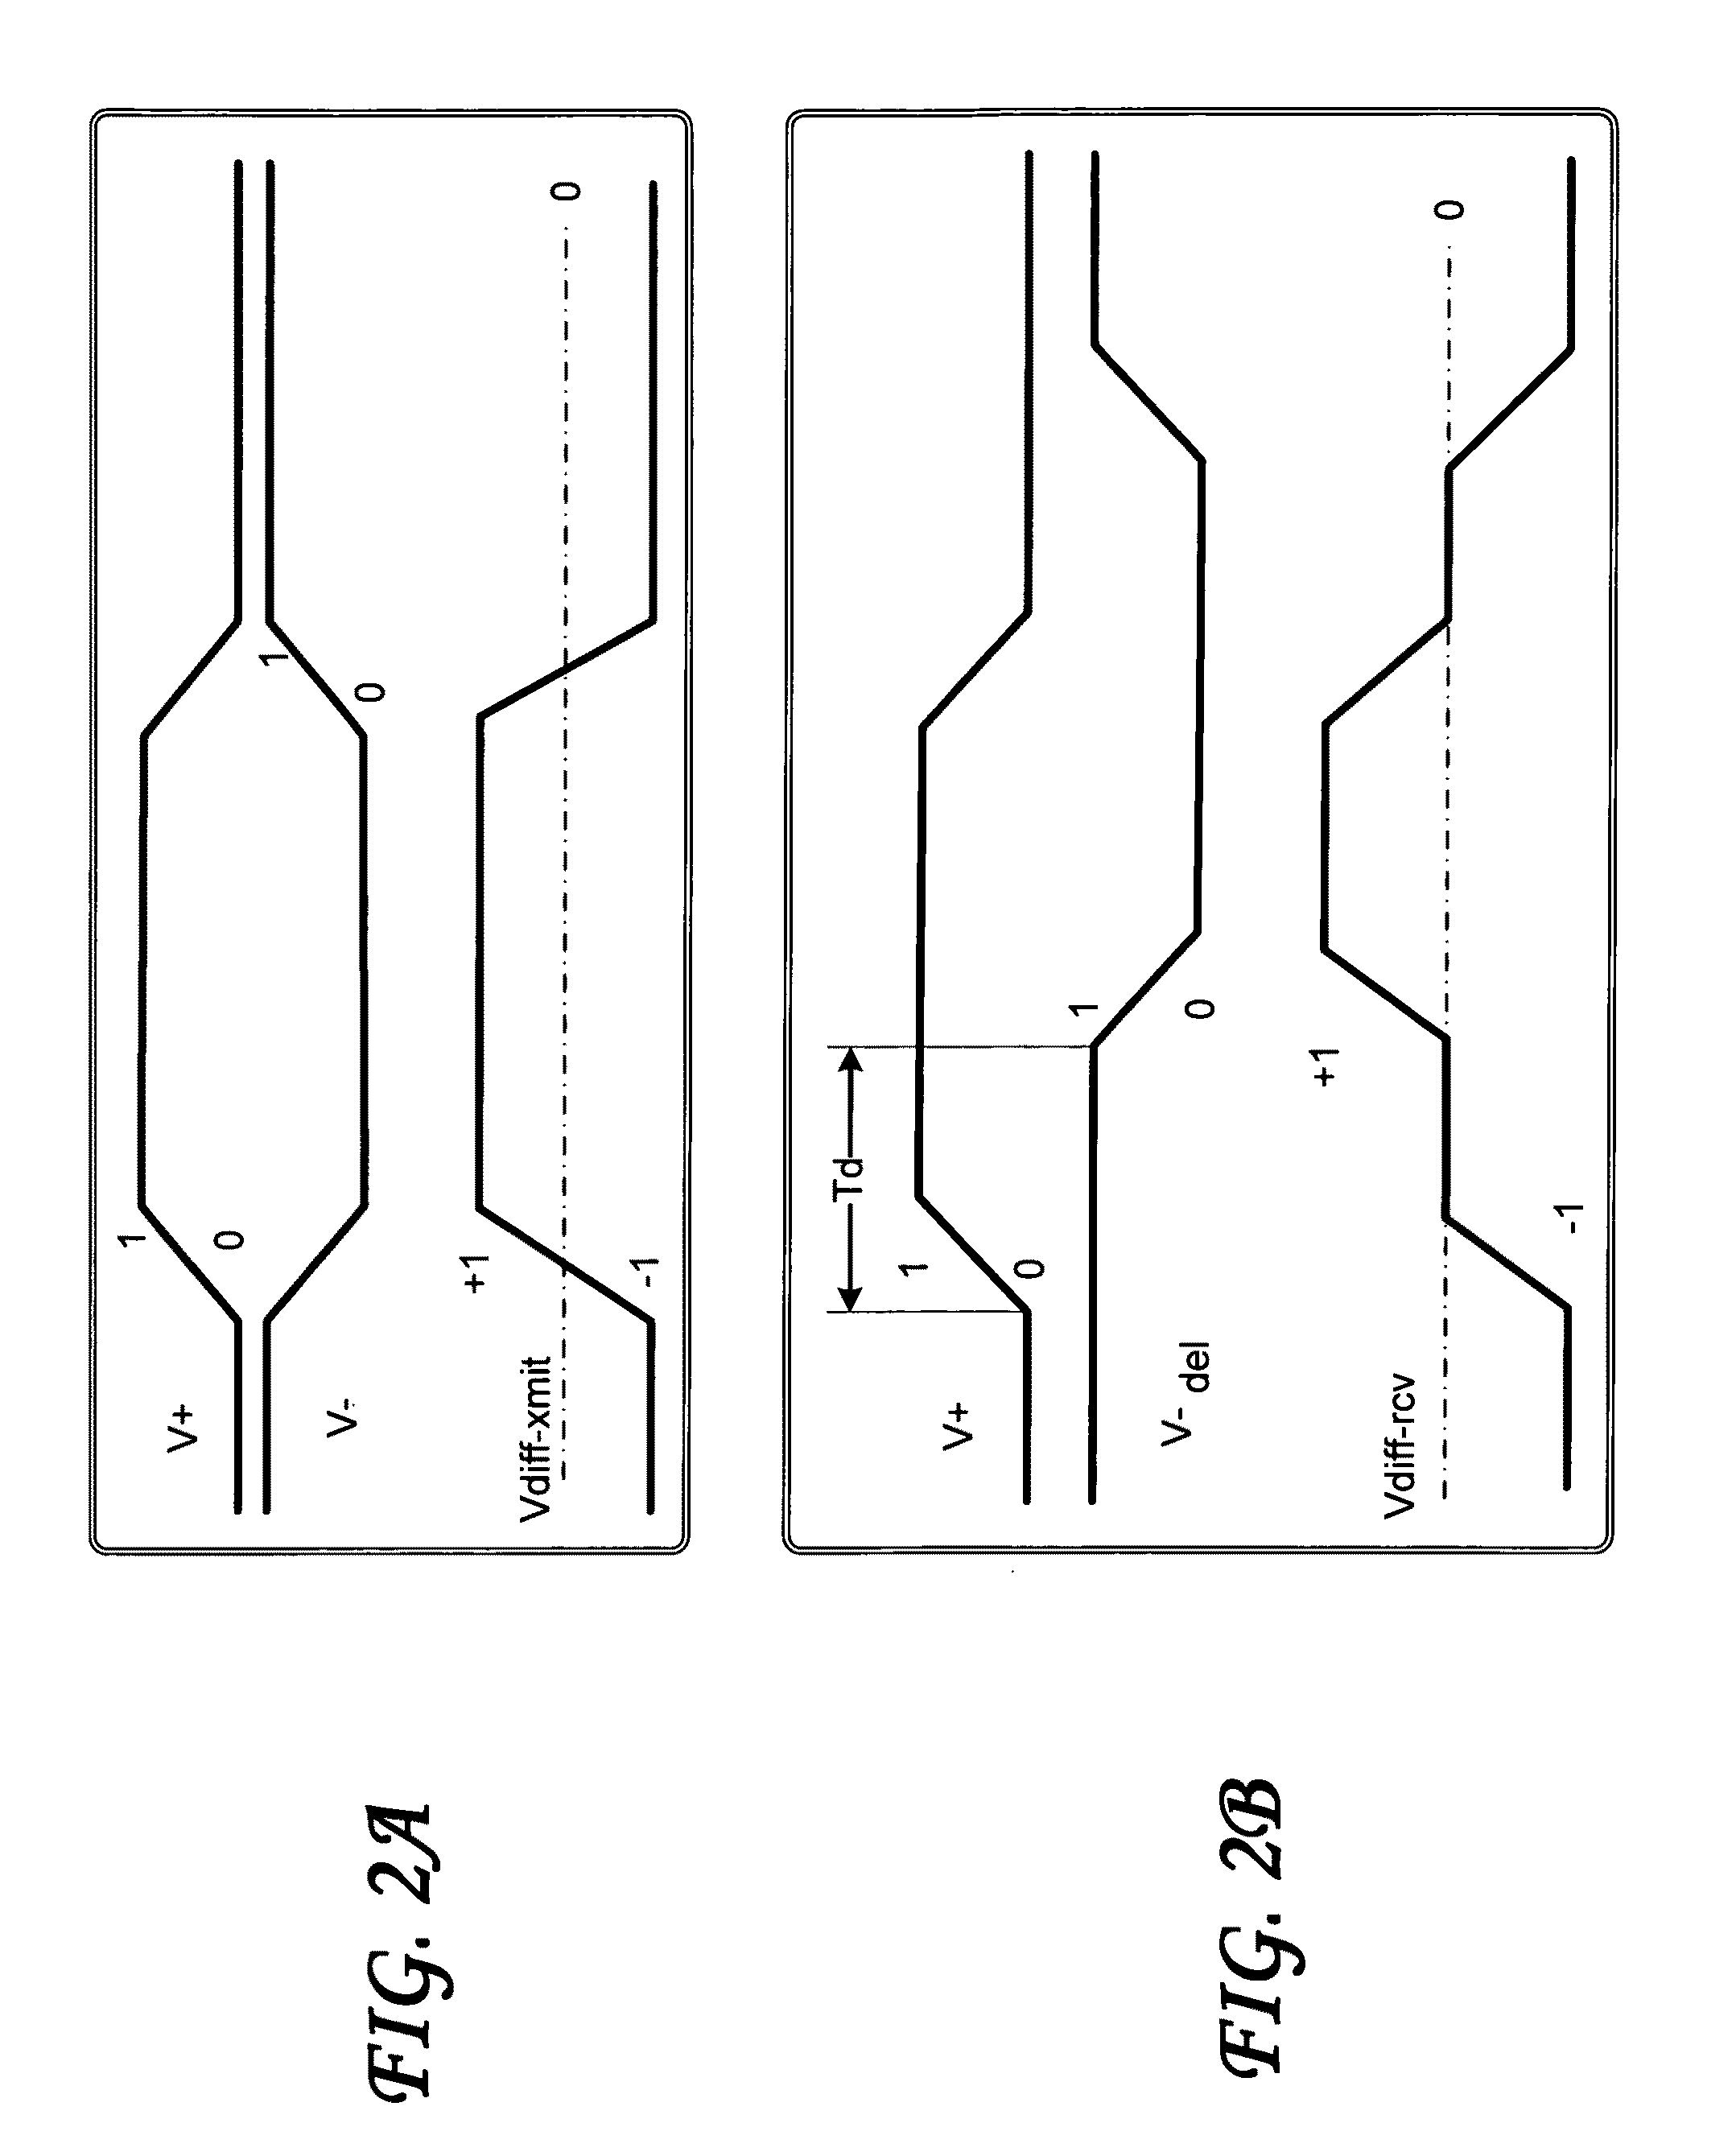 High-speed cable with embedded signal format conversion and power control